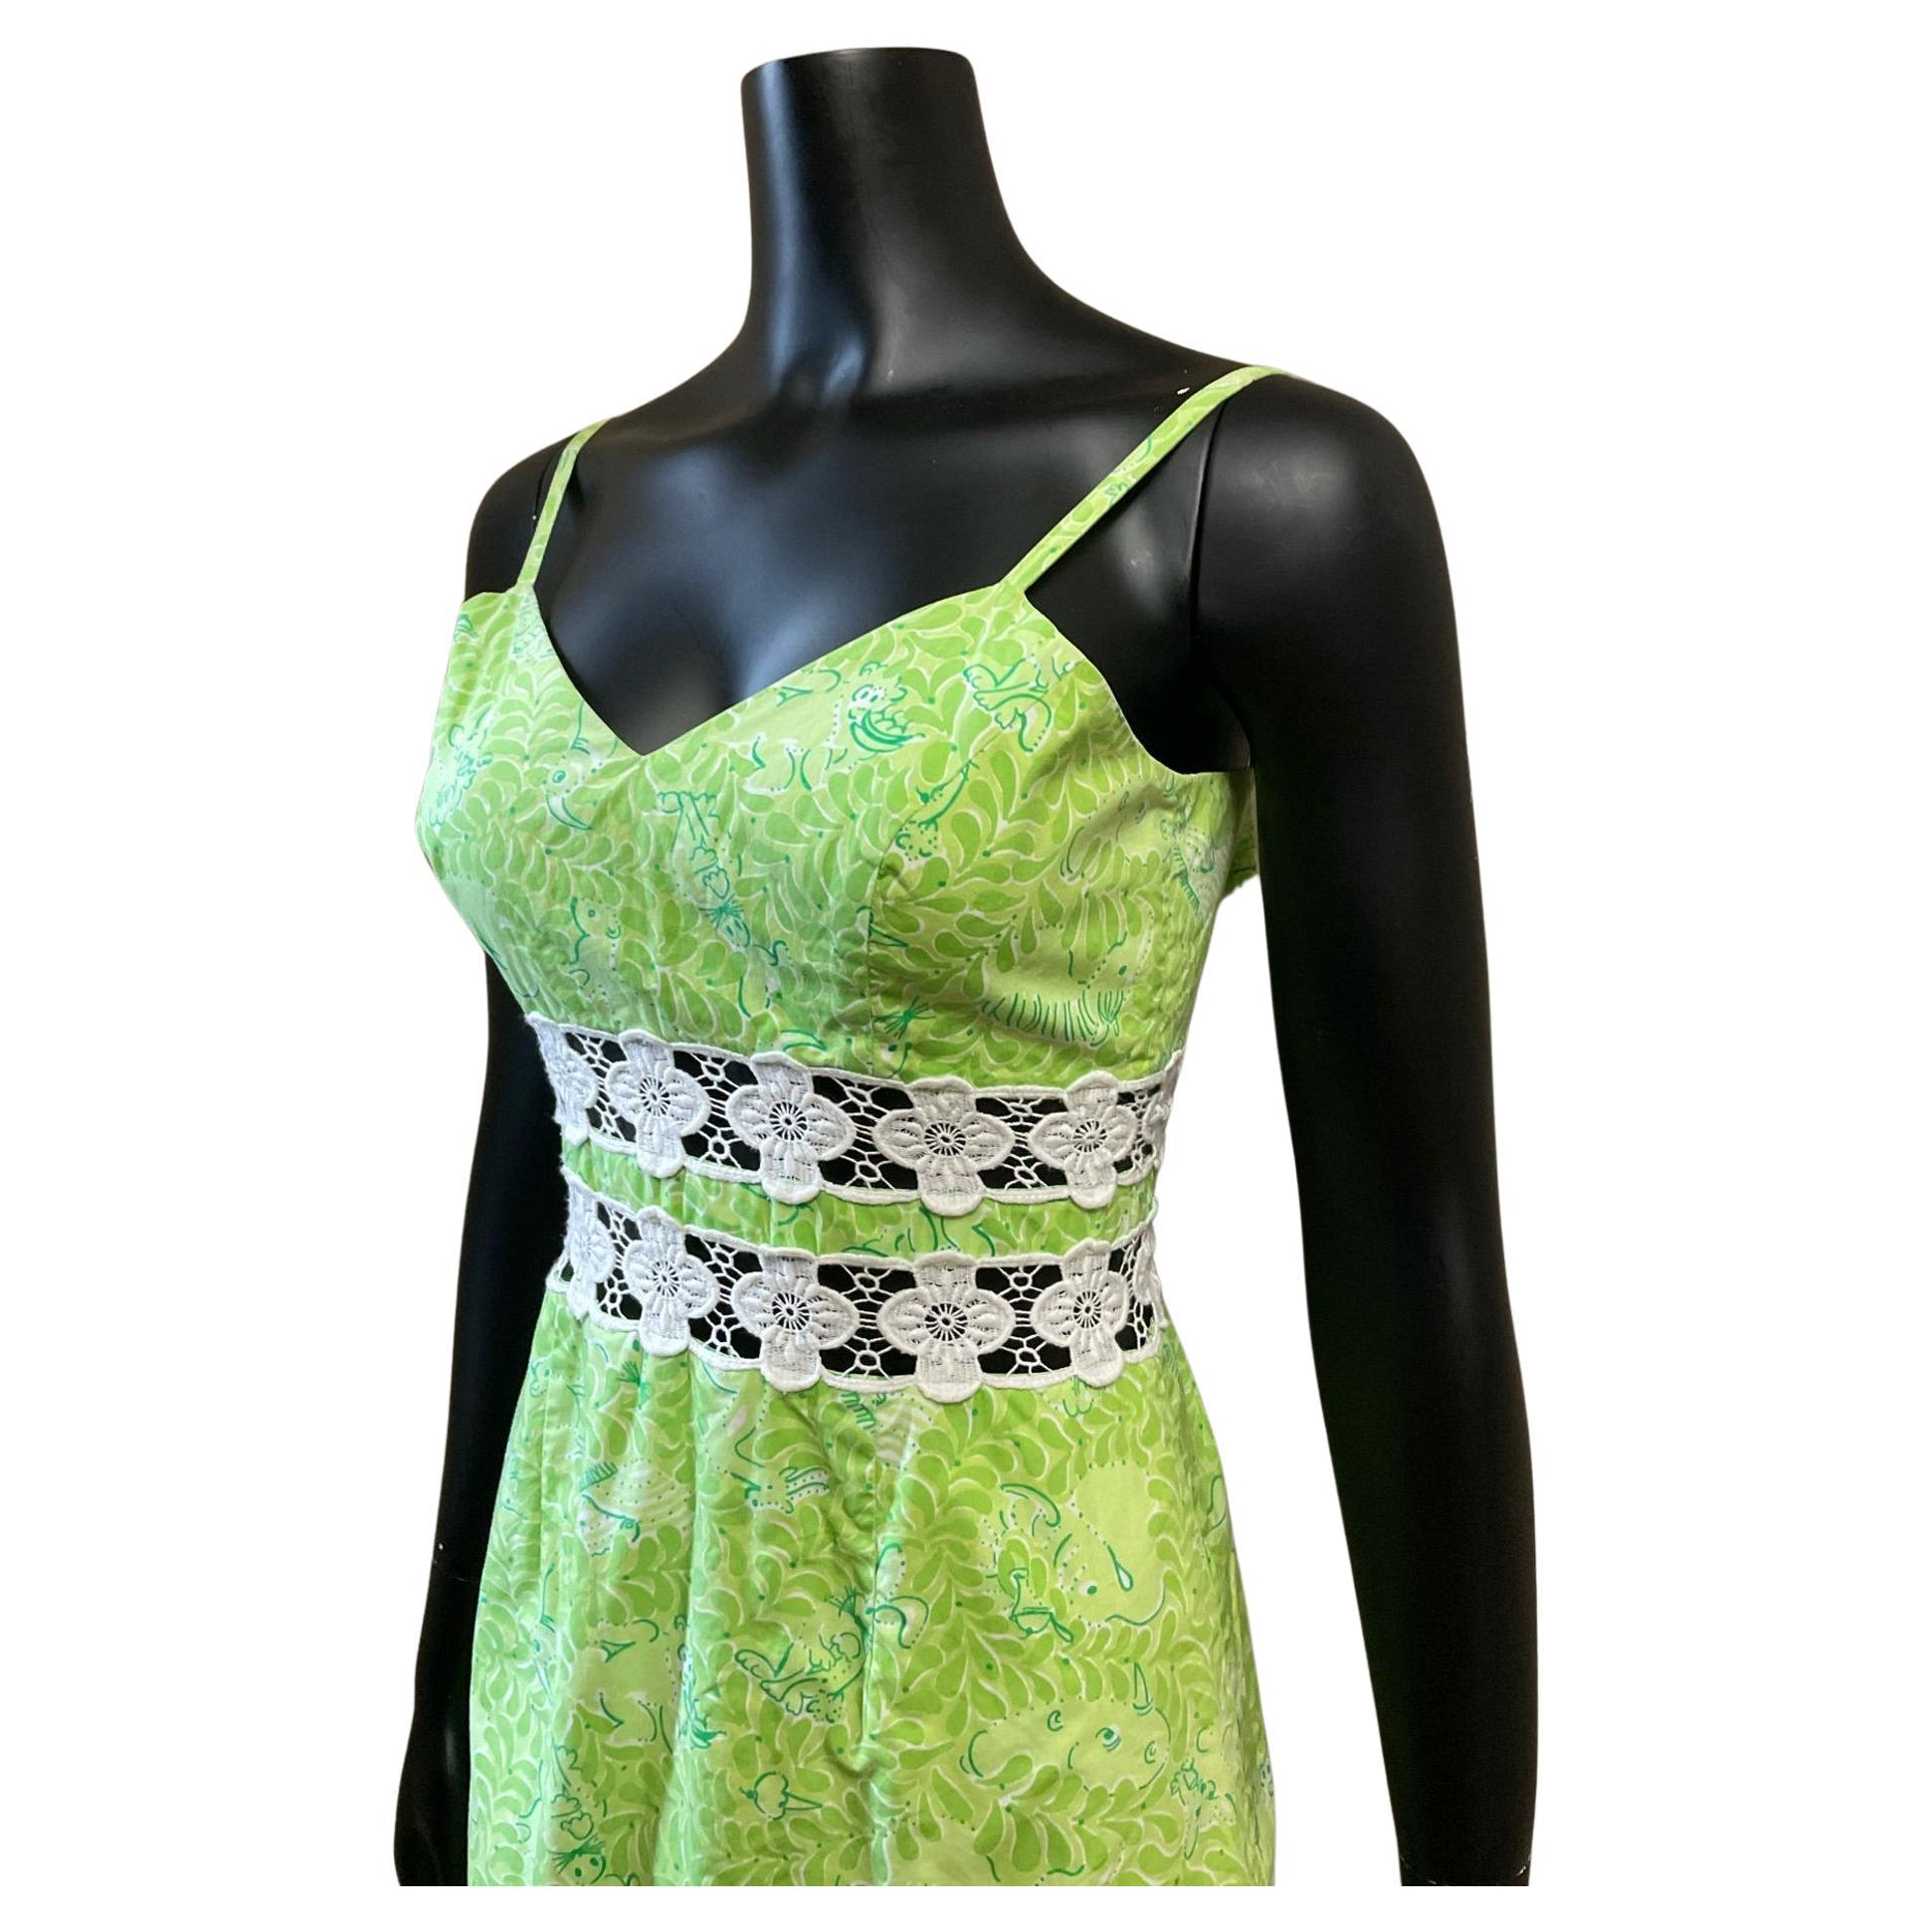 Lilly Pulitzer Lime Green Mini Dress, Circa 1990s For Sale 4